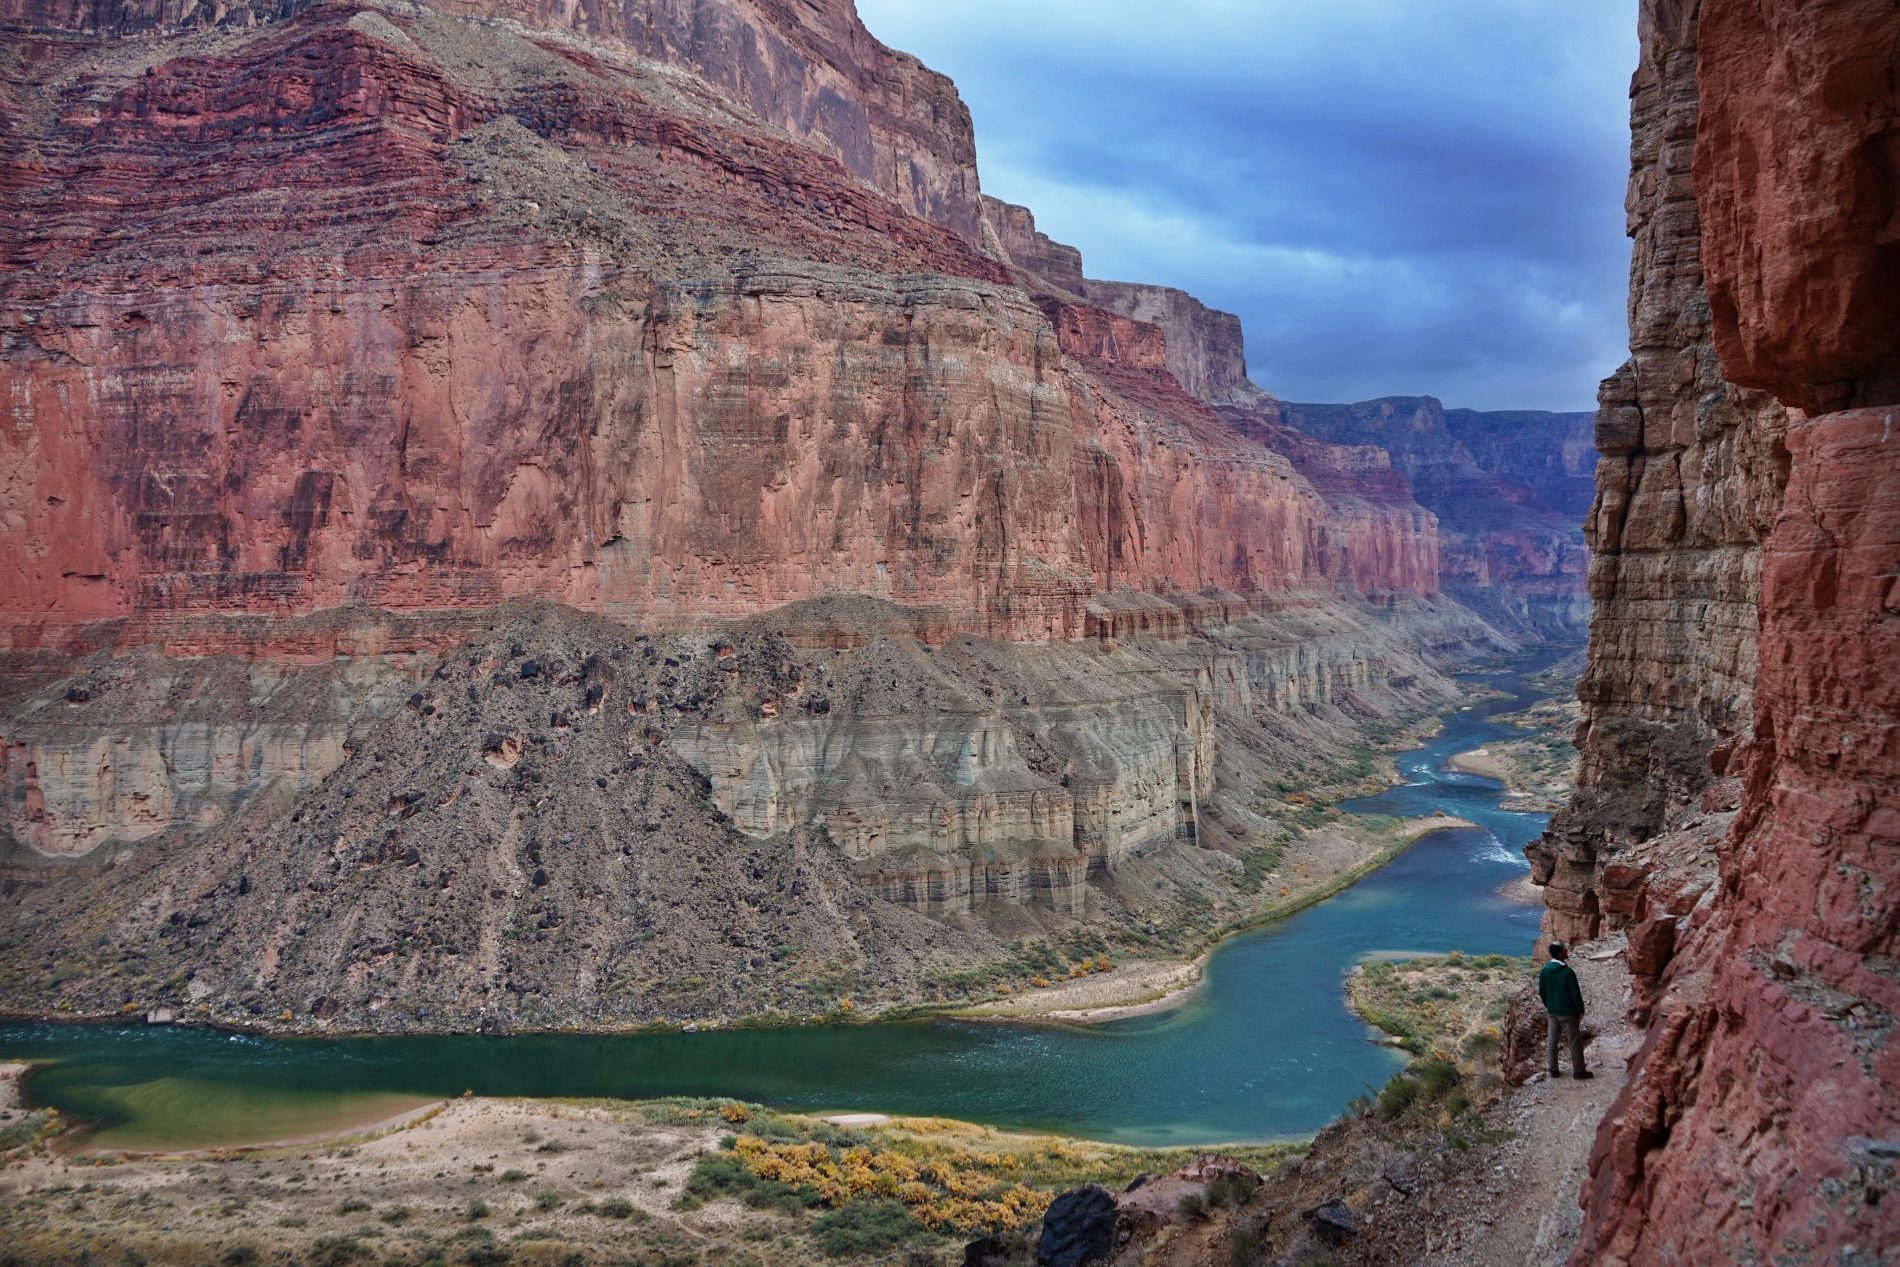 21 Days Of Rafting And Camping In The Grand Canyon